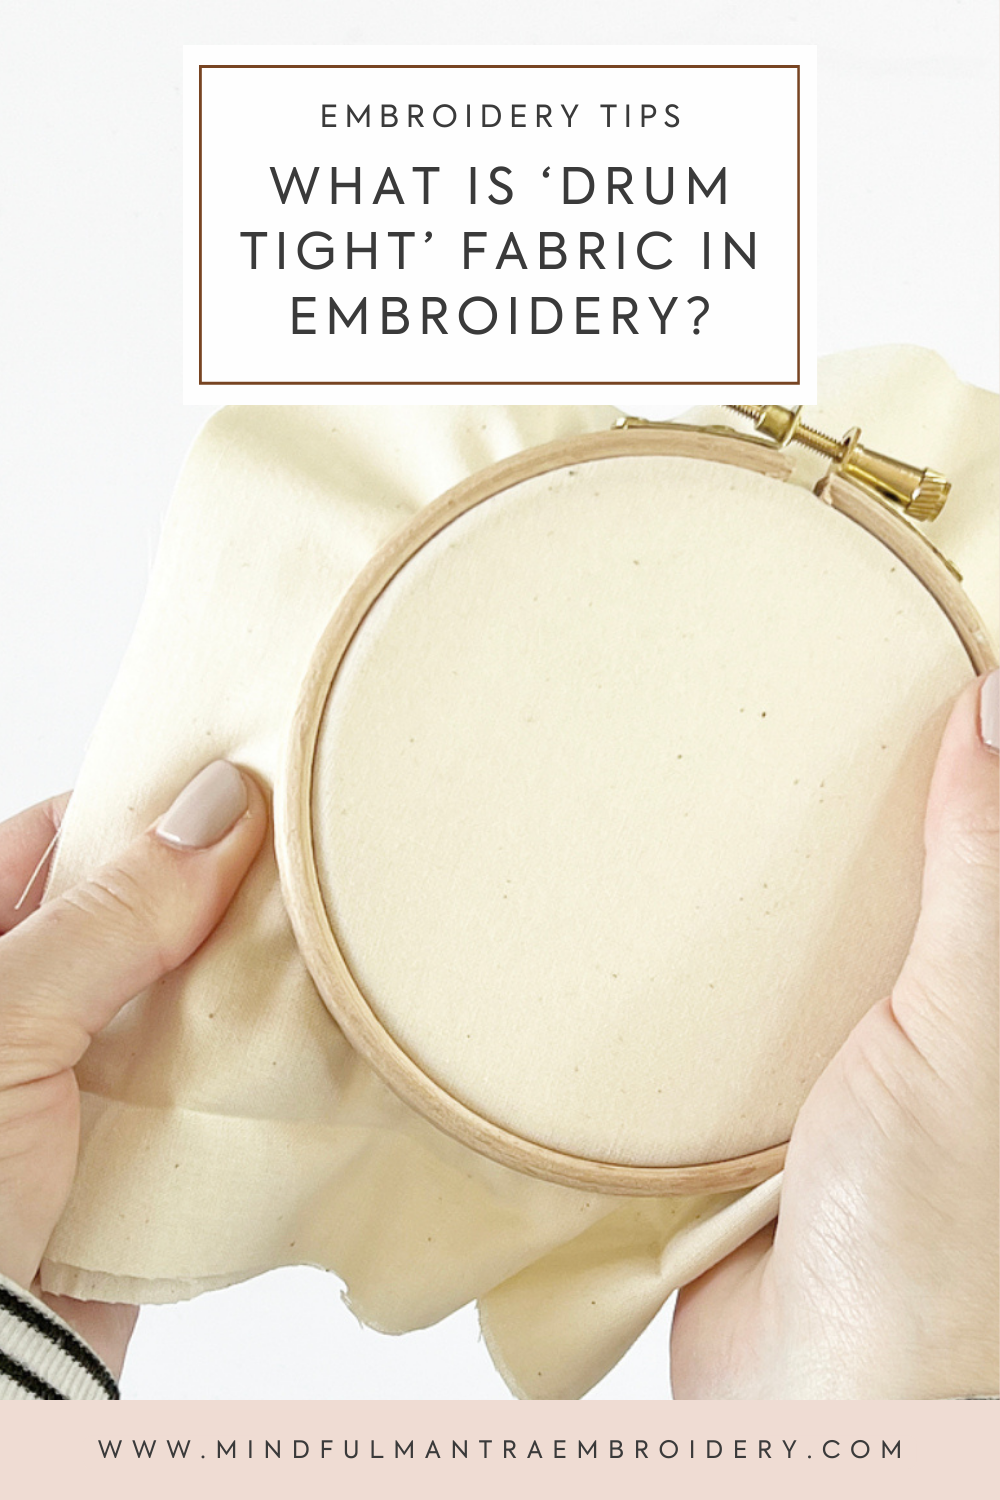 What Is 'Drum-Tight' Fabric in Embroidery?